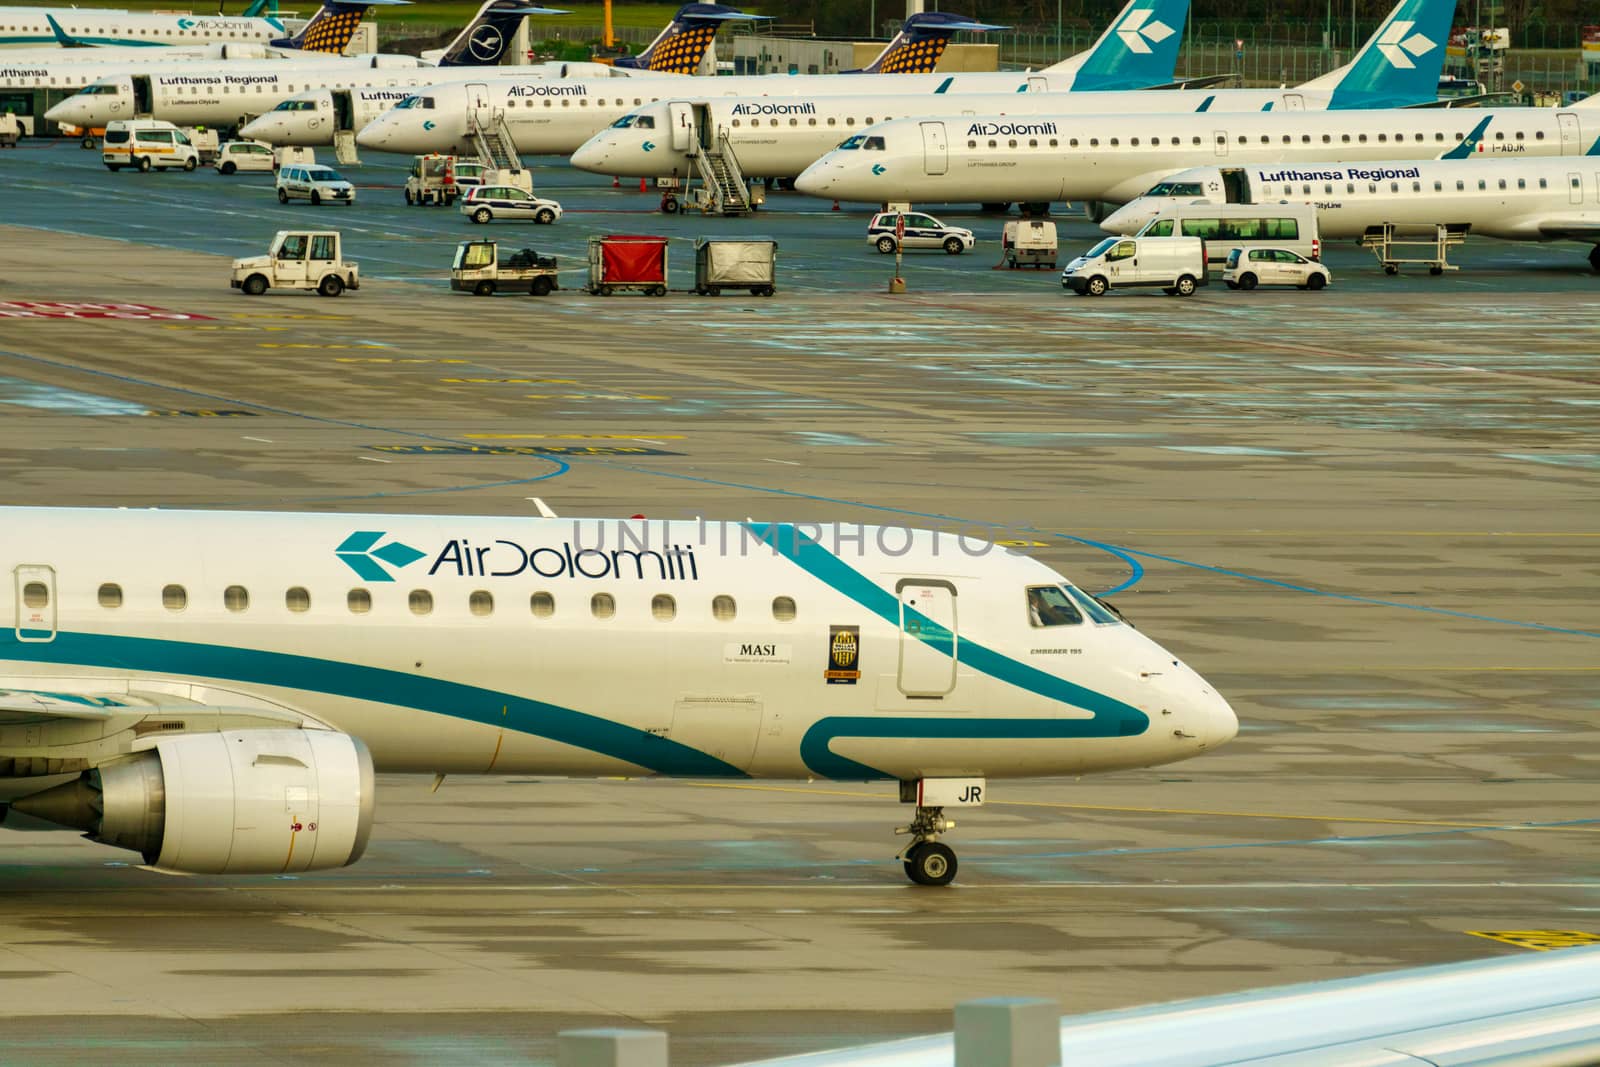 GERMANY, MUNICH - CIRCA 2020: Air Dolomiti Airline Airplane getting ready for landing or take off at Munich airport. Travel concept by dugulan